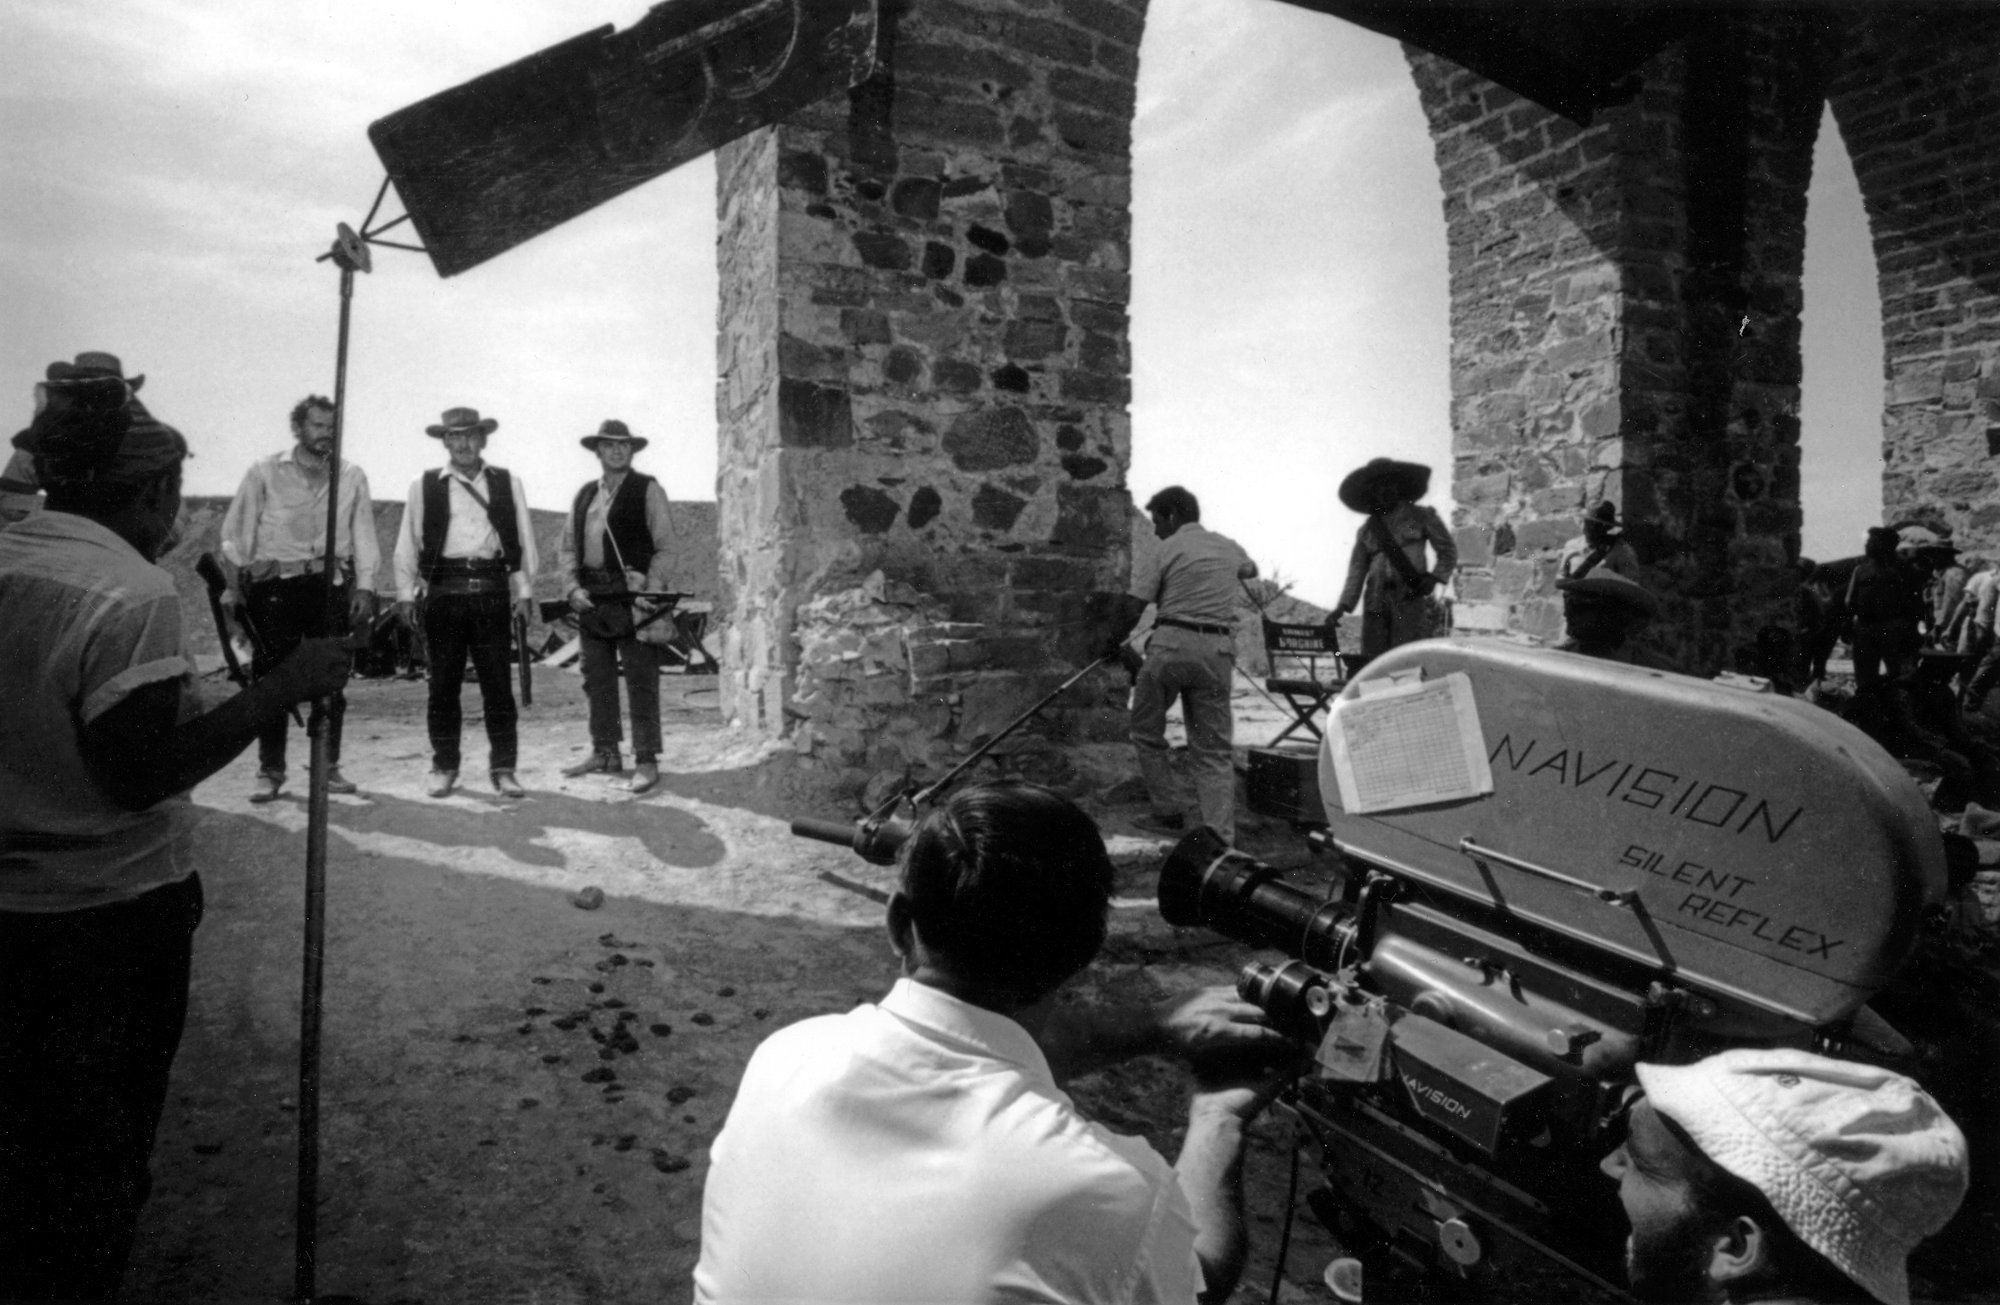 “It Ain’t Like It Used to Be. But It’ll Do:” How Sam Peckinpah’s ‘The Wild Bunch’ Became Both a Eulogy for a Mythic Past and a Template for a New Kind of Action